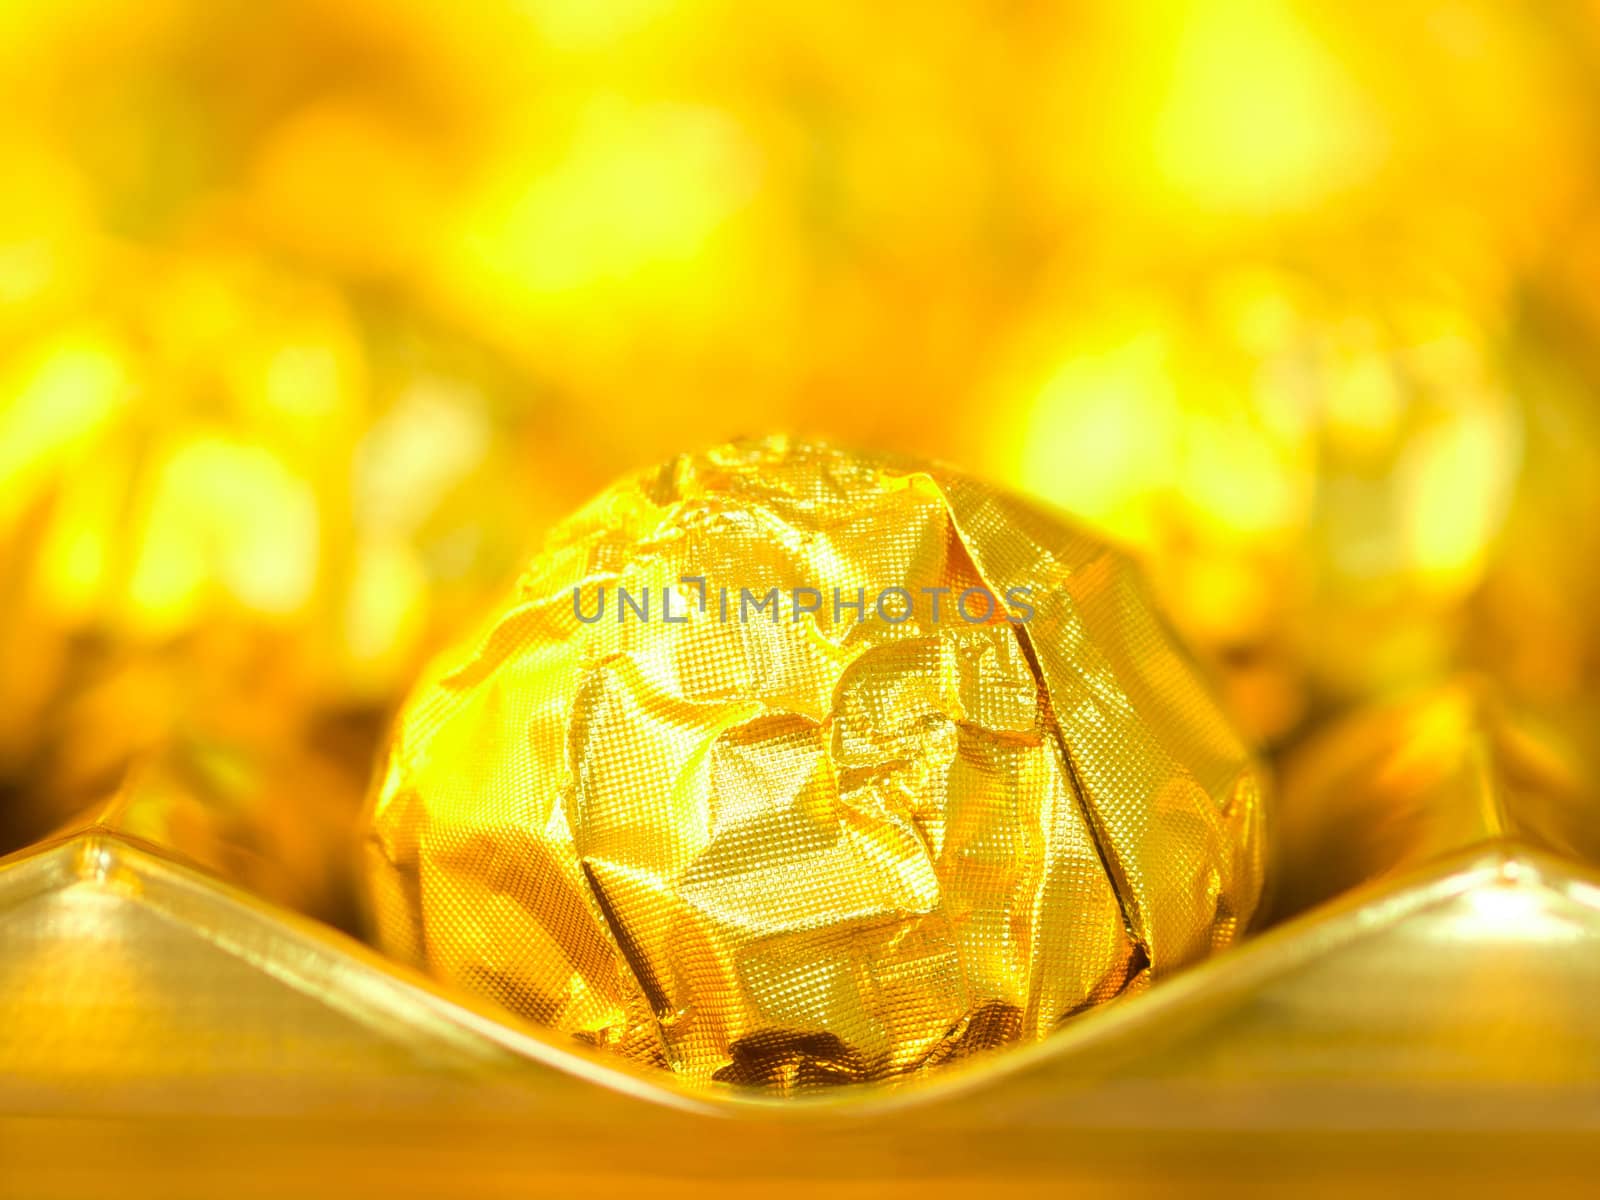 candy in gold wrappers by zkruger